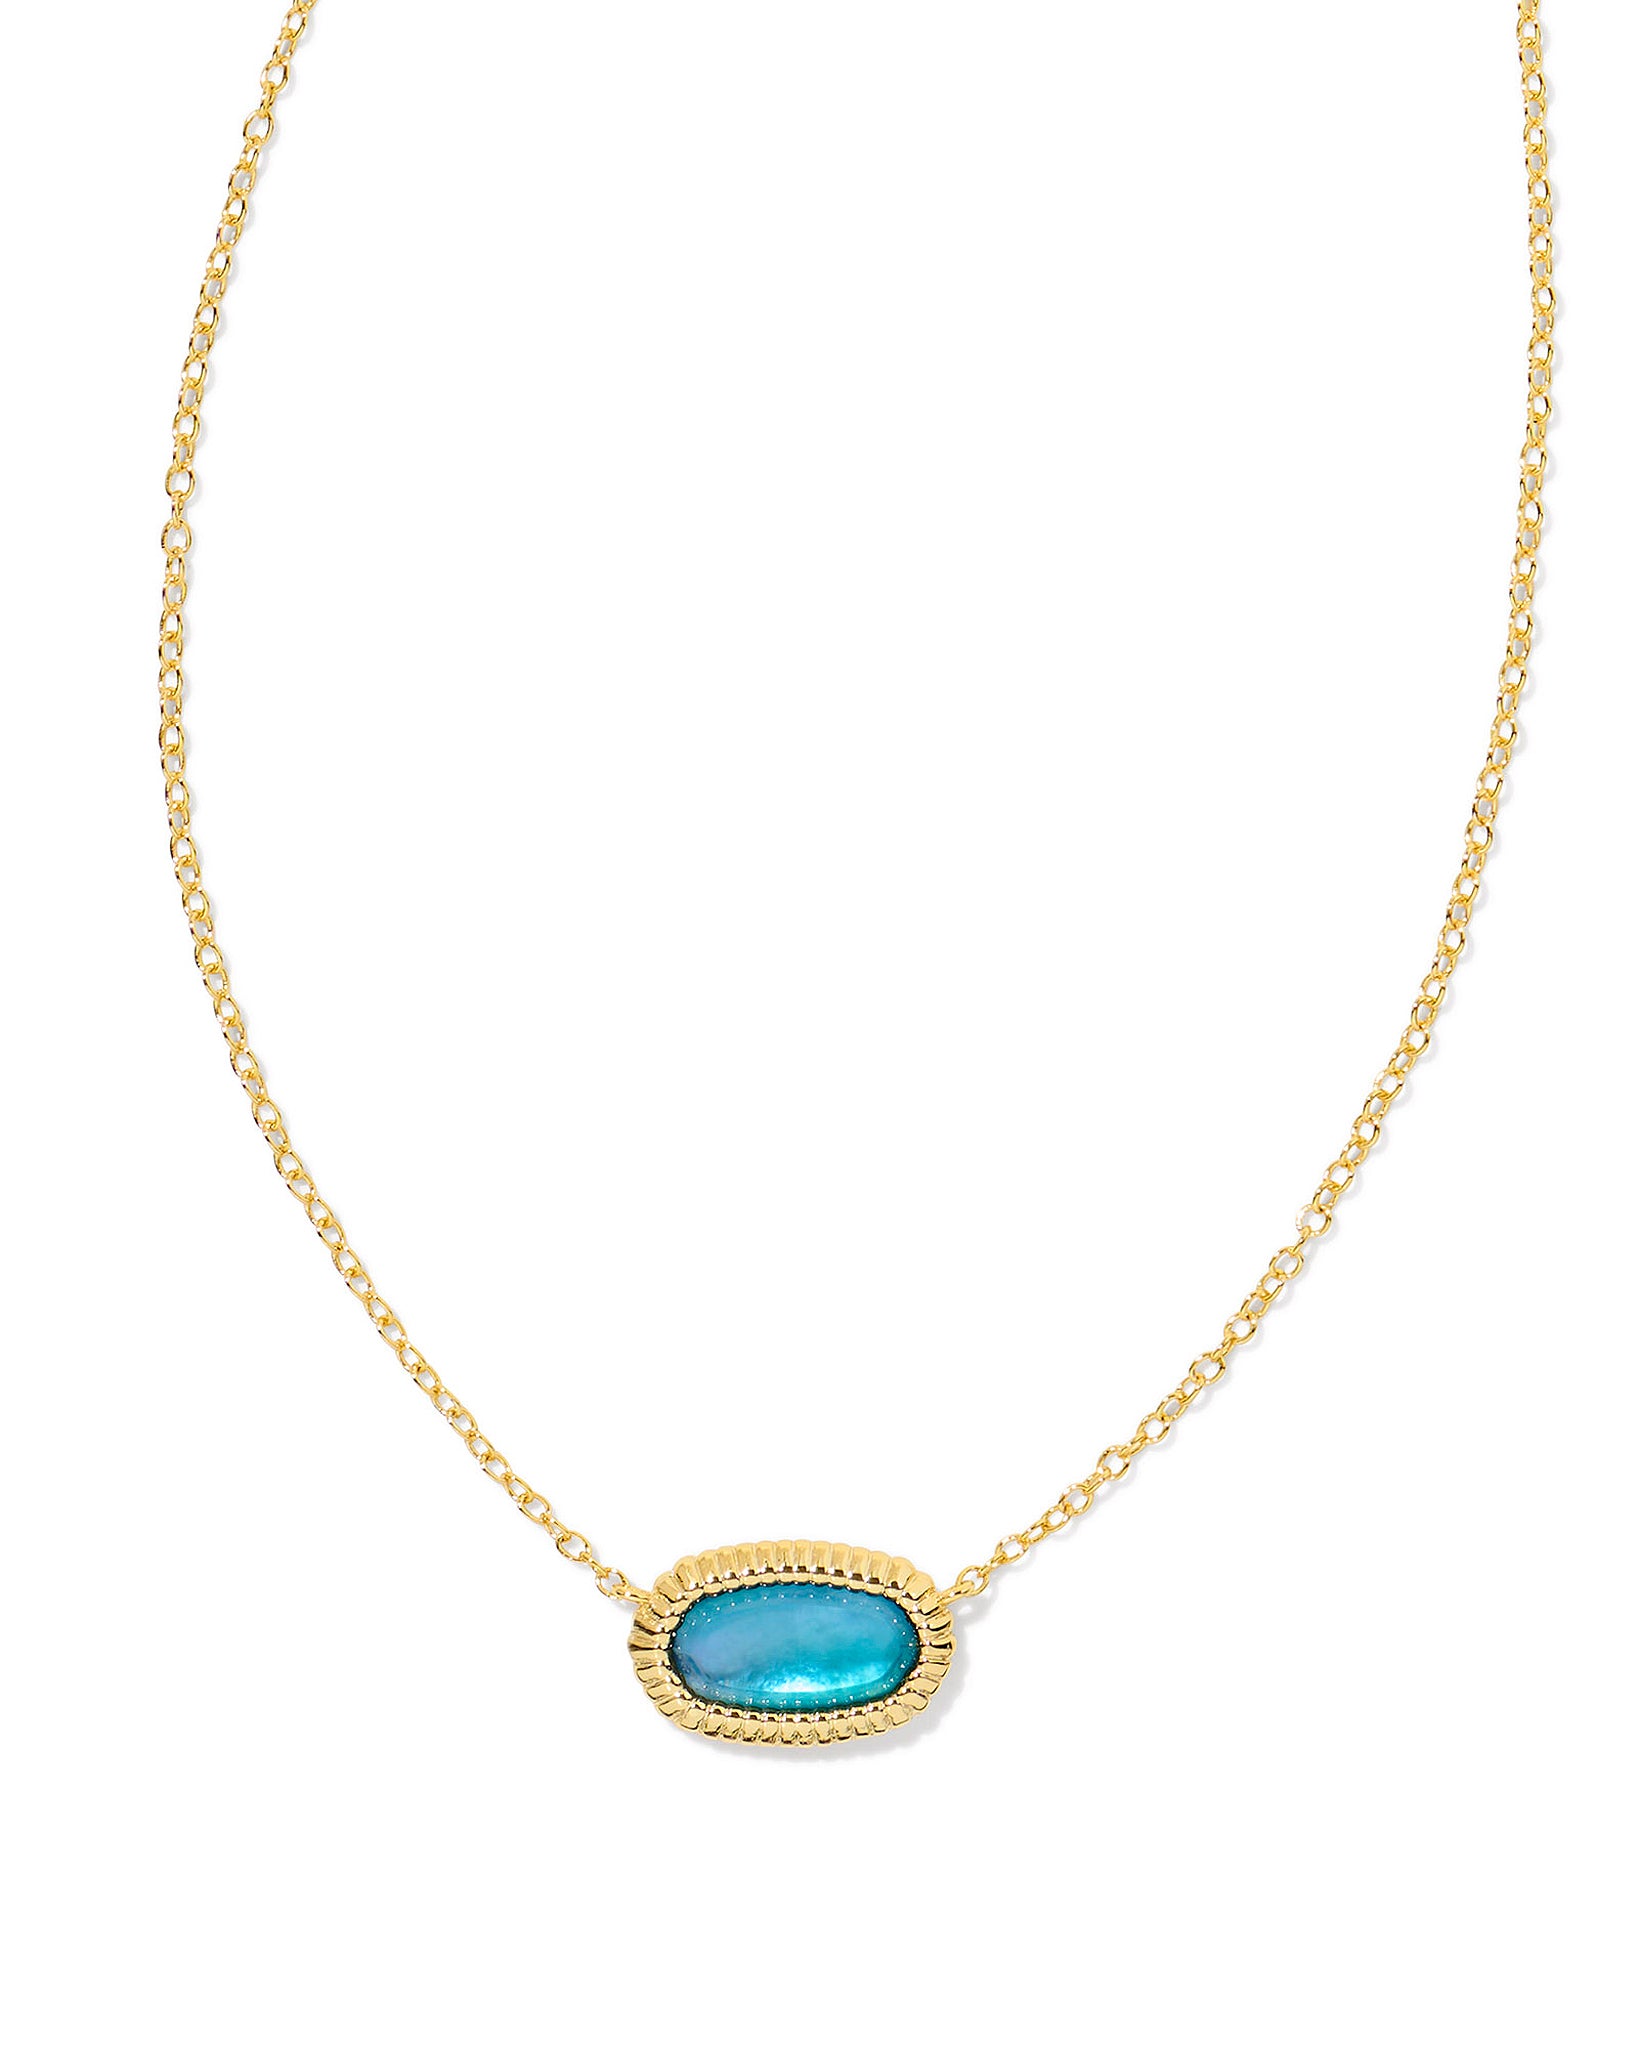 Kendra Scott Elisa Ridge Framed Oval Pendant Necklace in Indigo Watercolor Illusion and Gold Plated